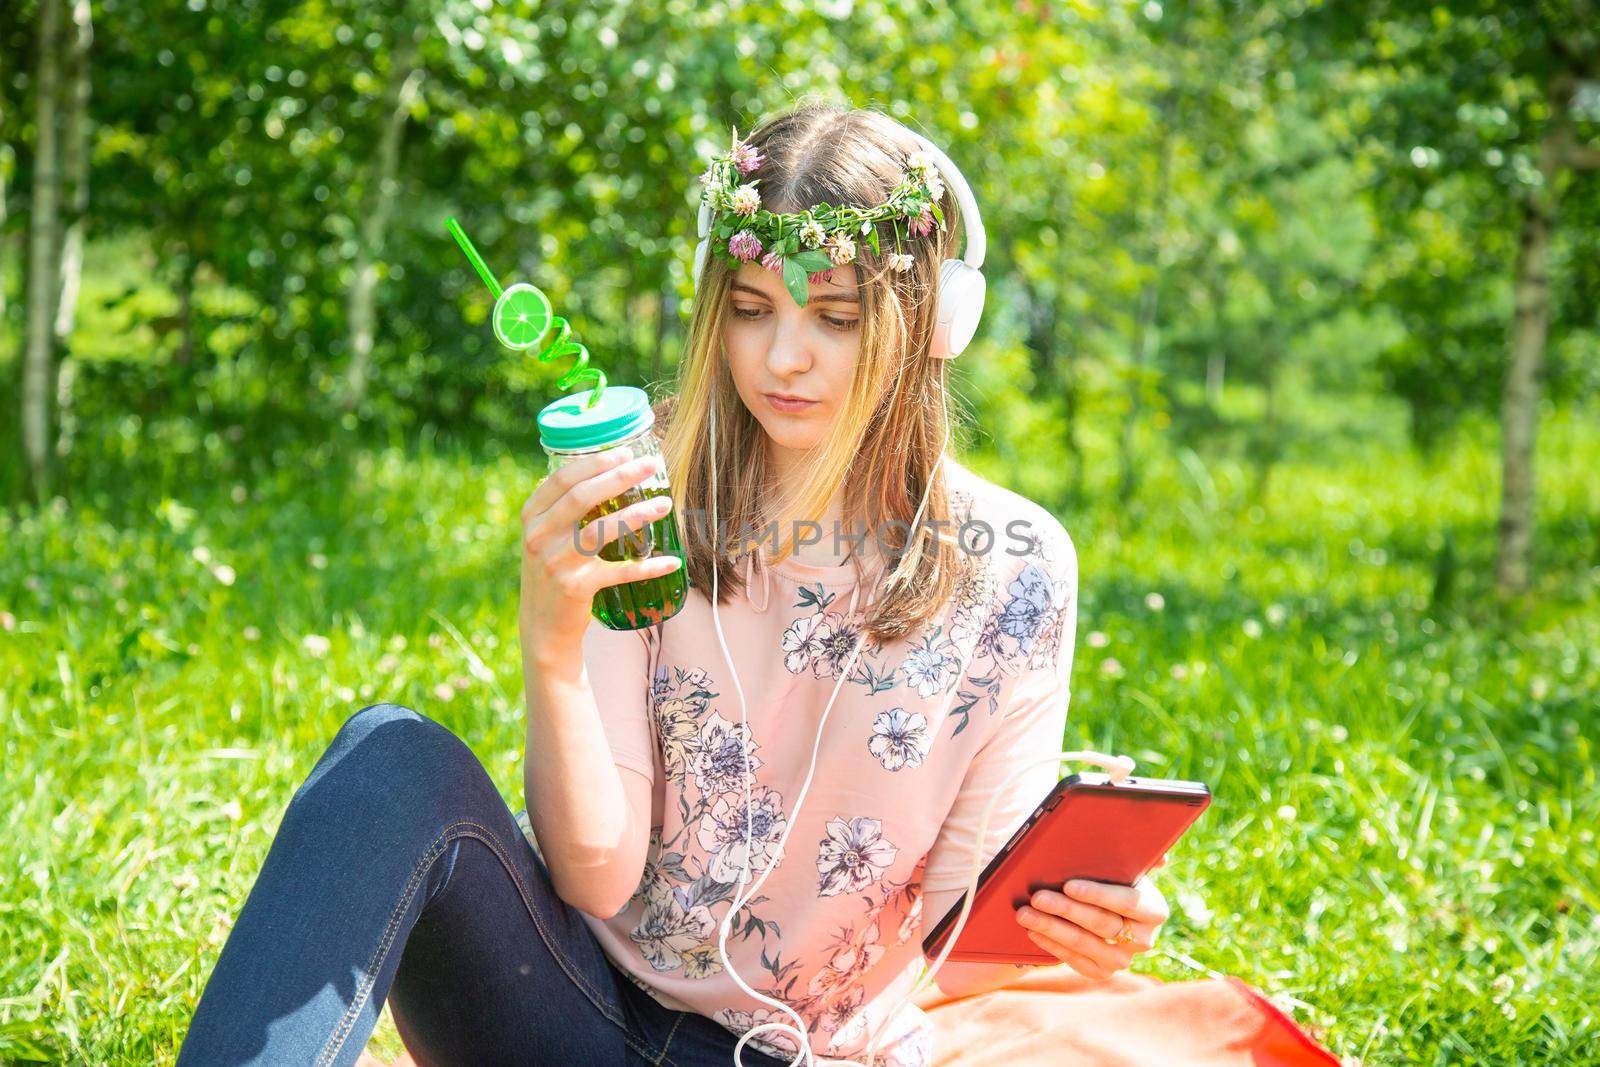 A young girl listens to music on her mobile phone and drinks smoothies in park by galinasharapova